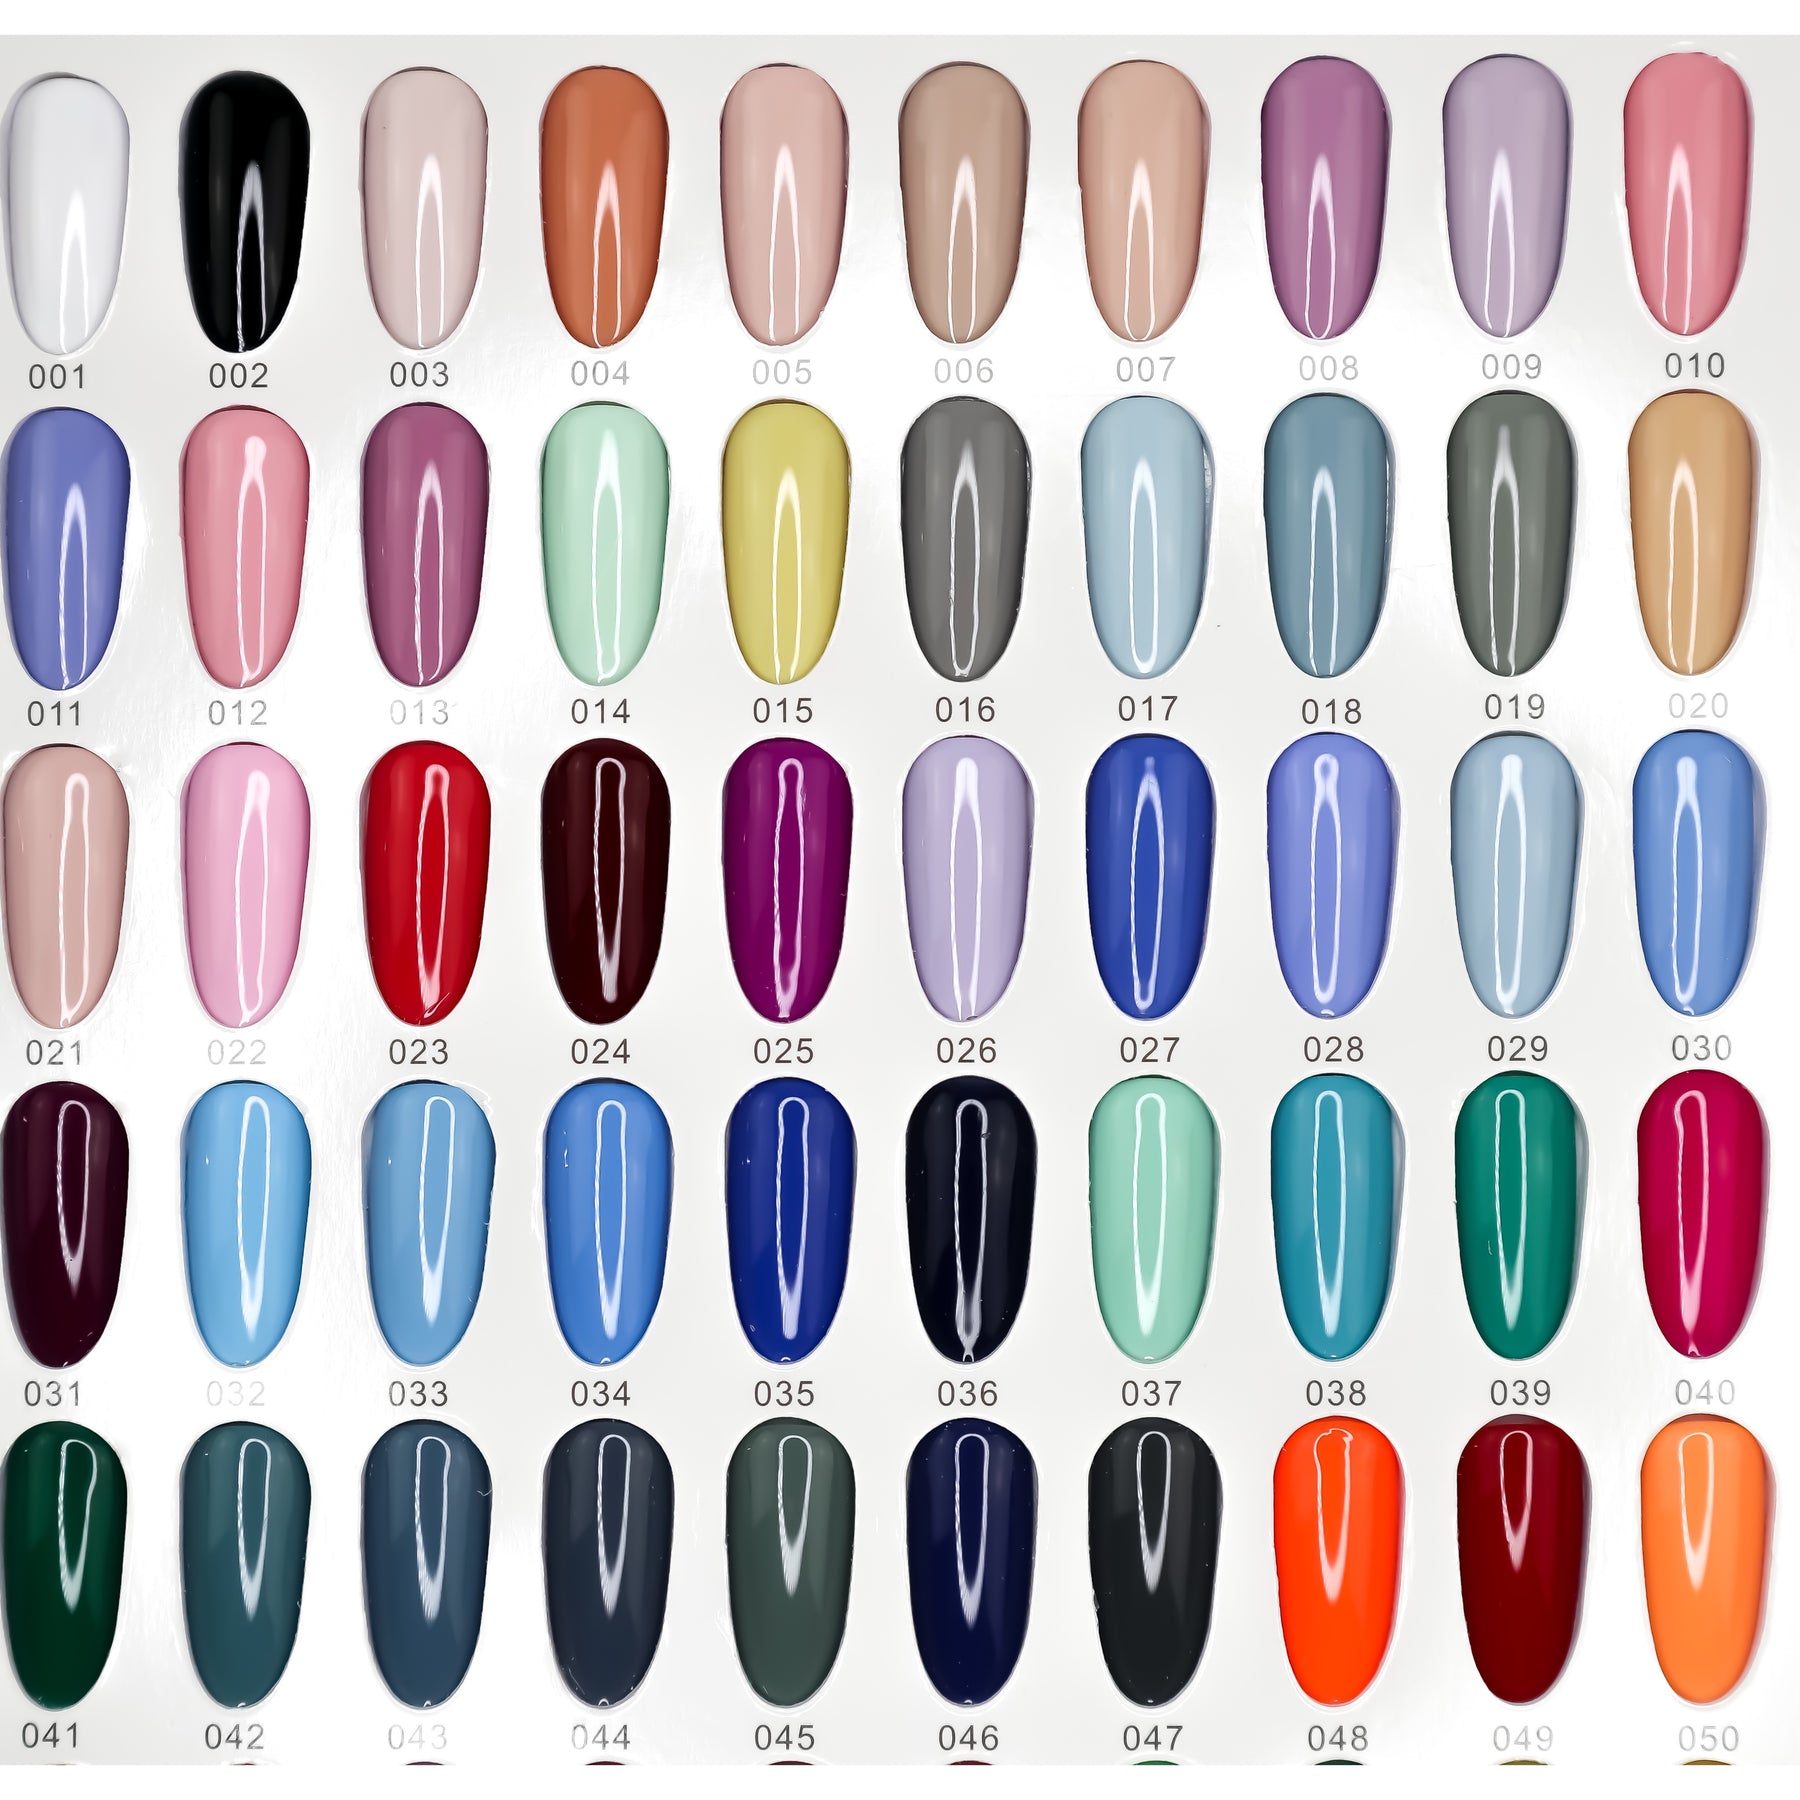 Here's Your Exclusive First Look at Hermès's New Nail Polish Line